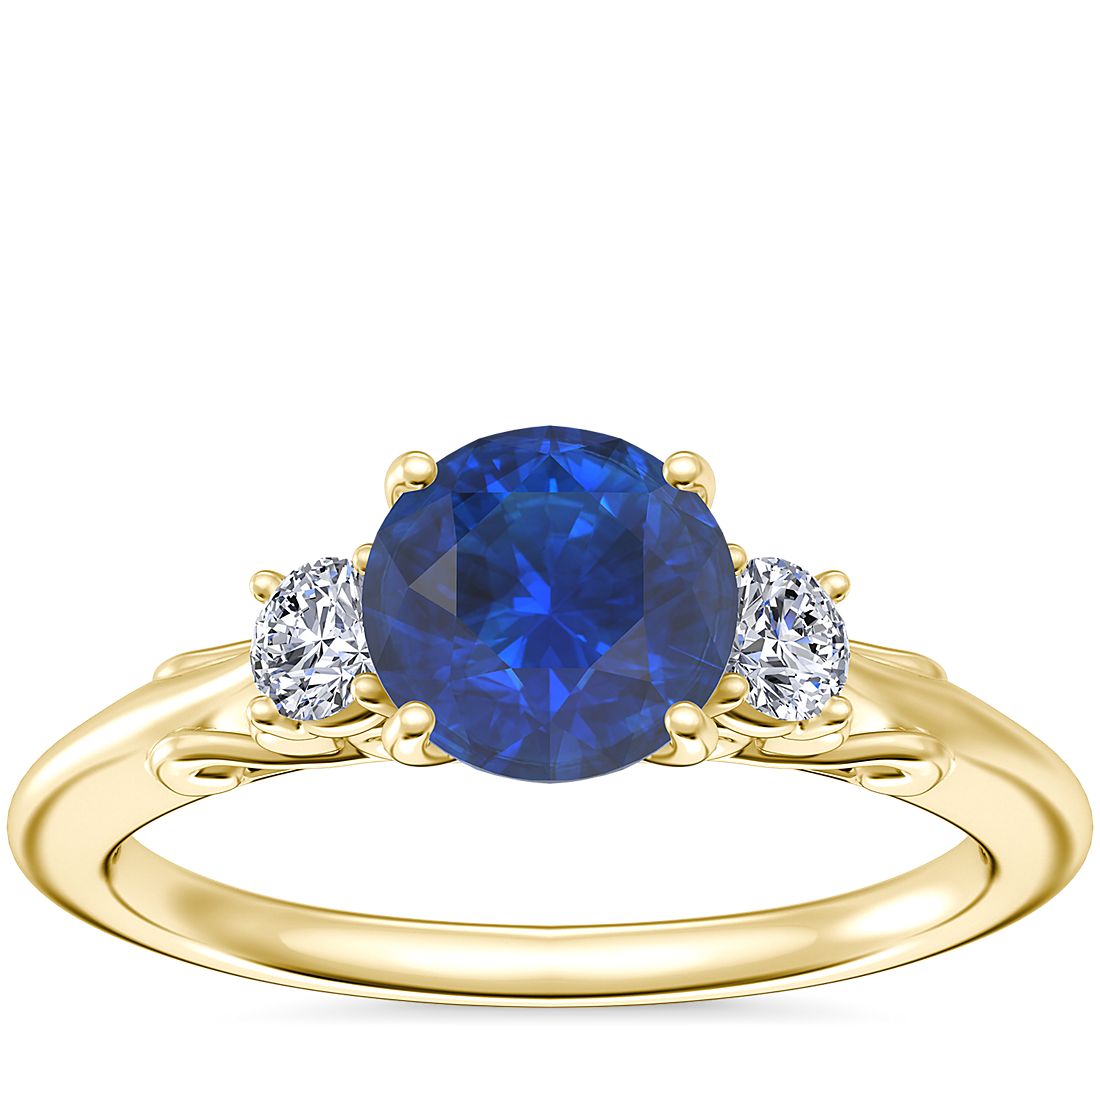 Vintage Three Stone Engagement Ring with Round Sapphire in 18k Yellow Gold (6mm)